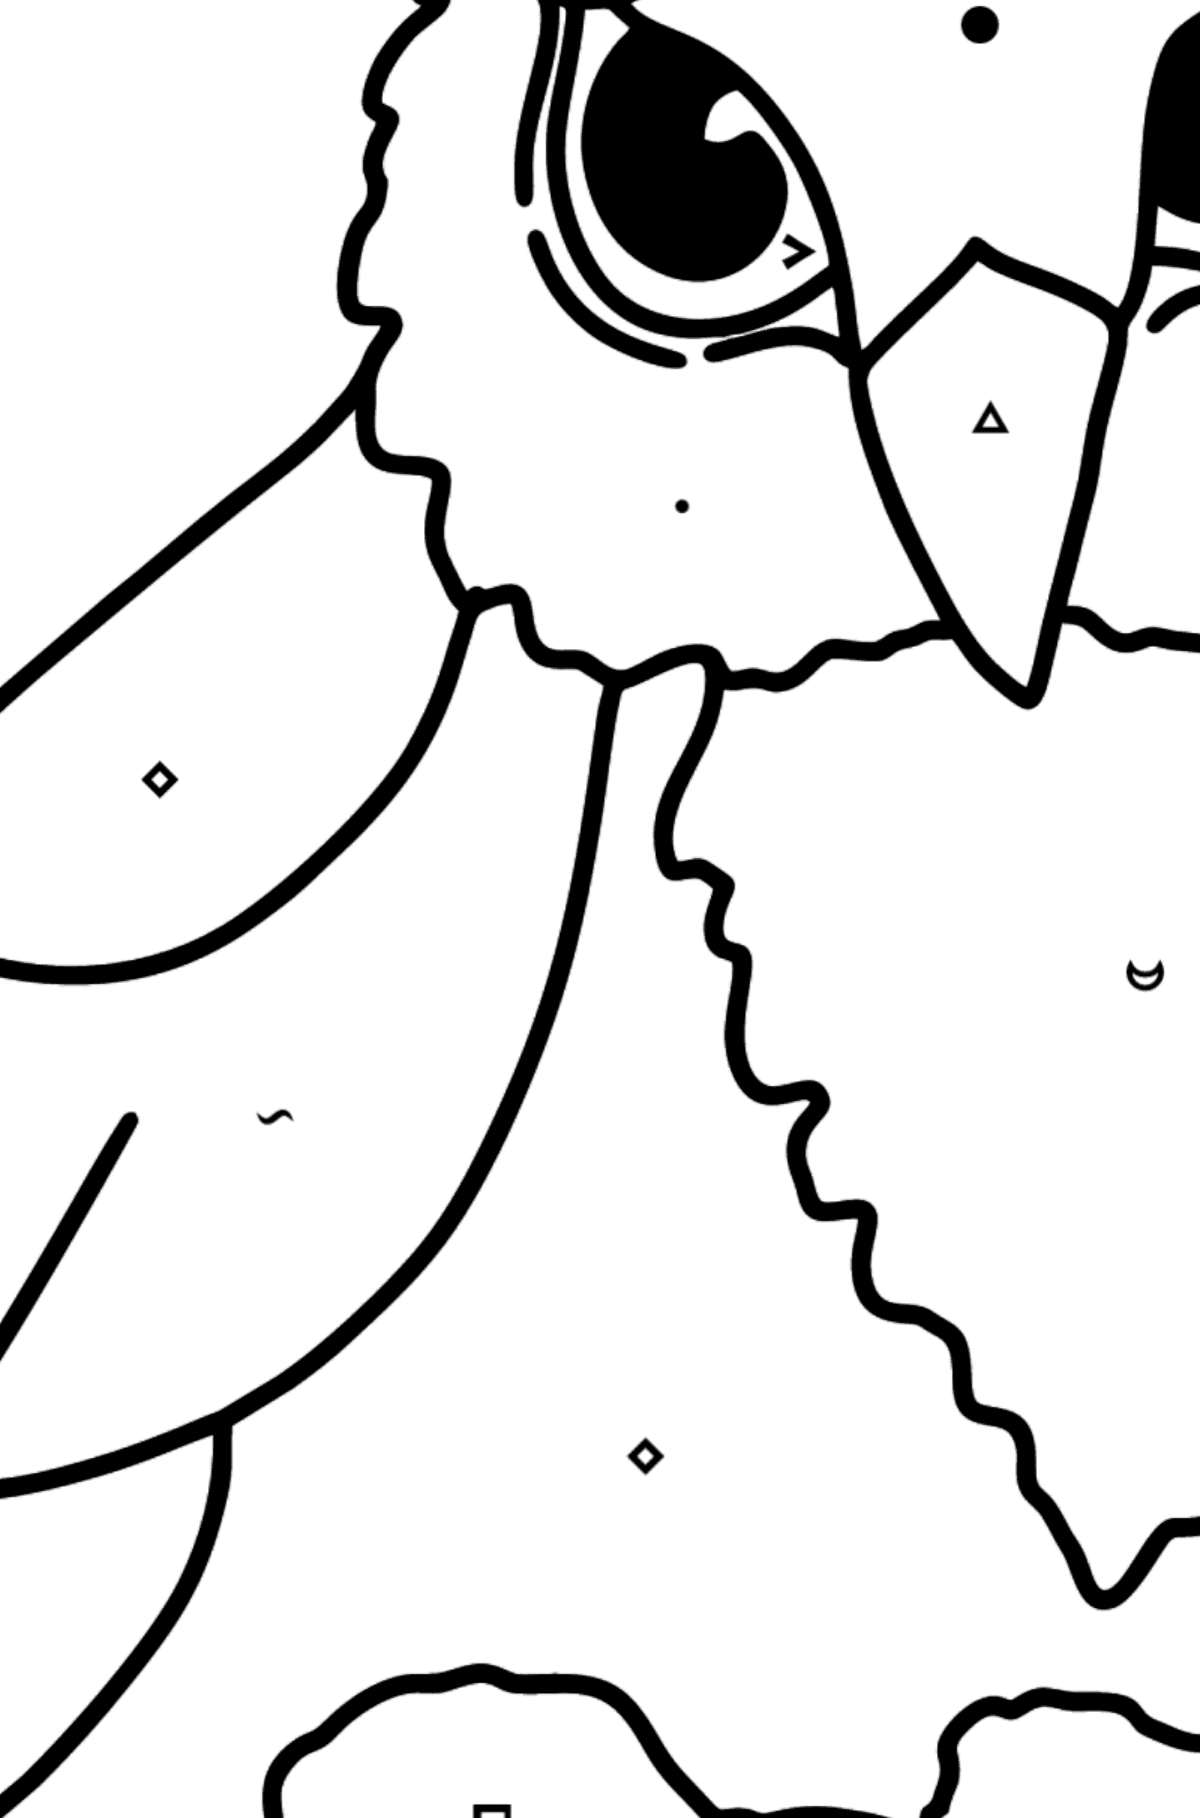 Bird coloring page - Owlet - Coloring by Symbols for Kids